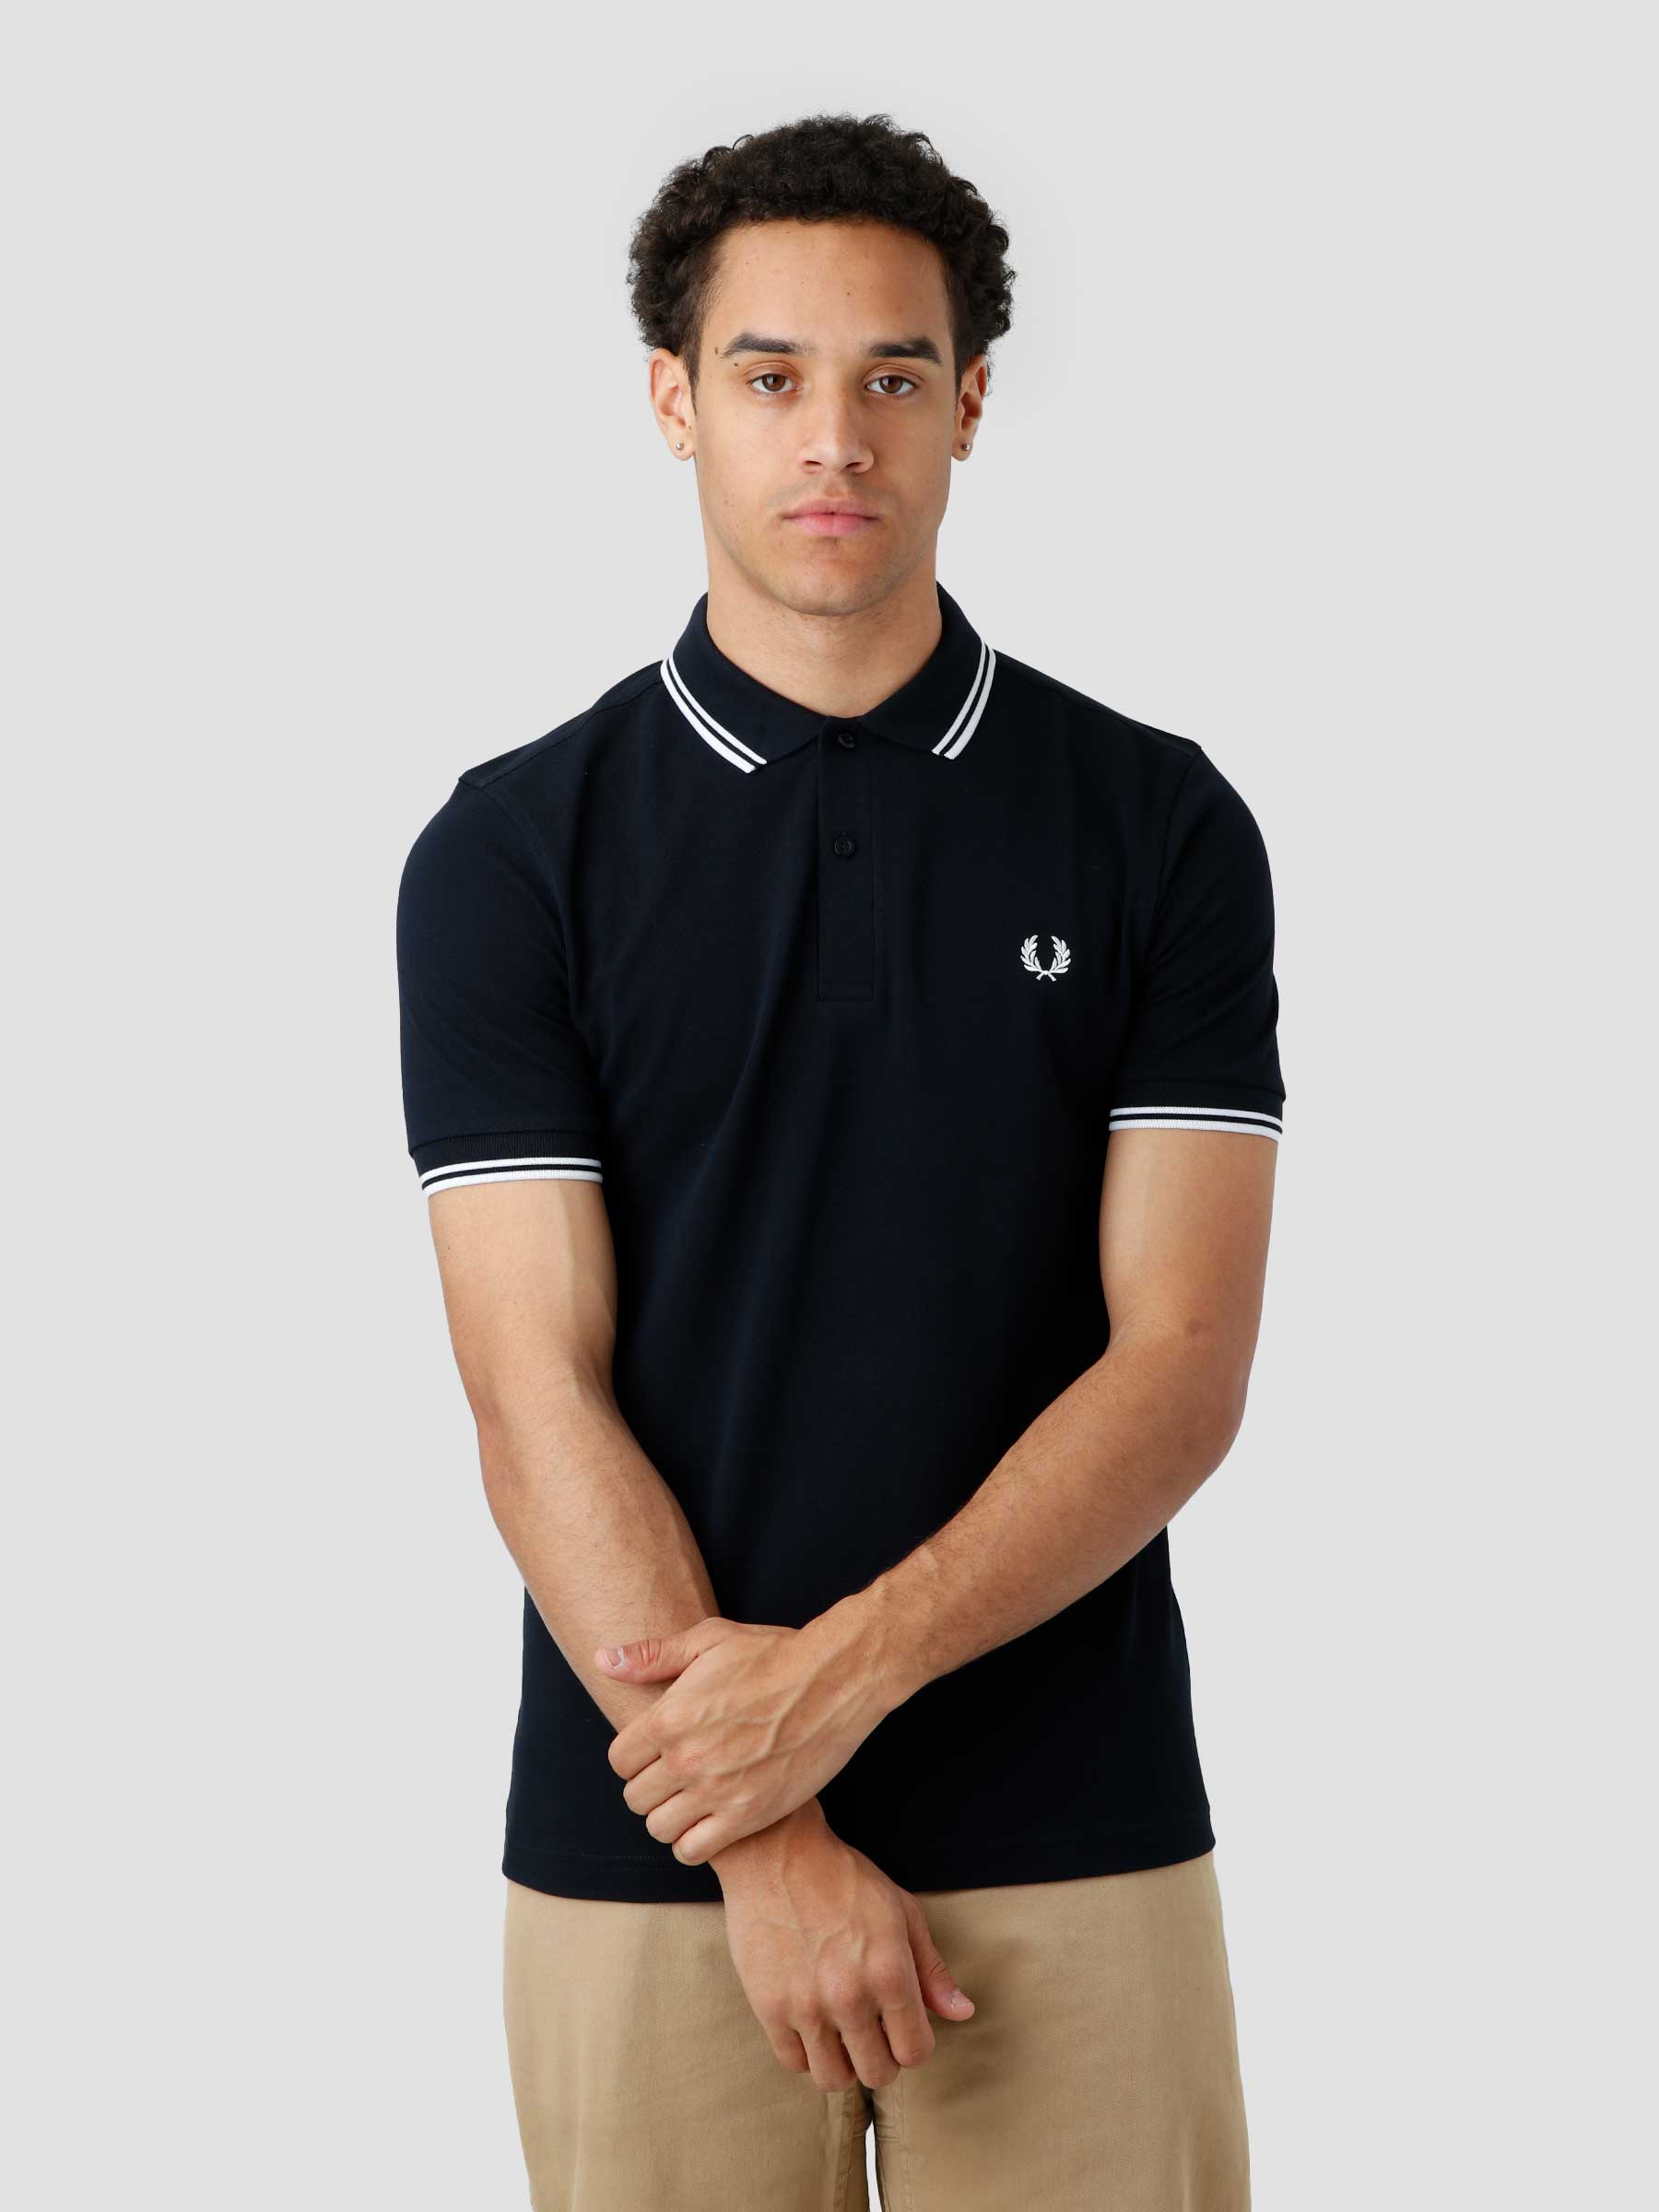 Twin Tipped Fred Perry Shirt Navy/White M3600-238